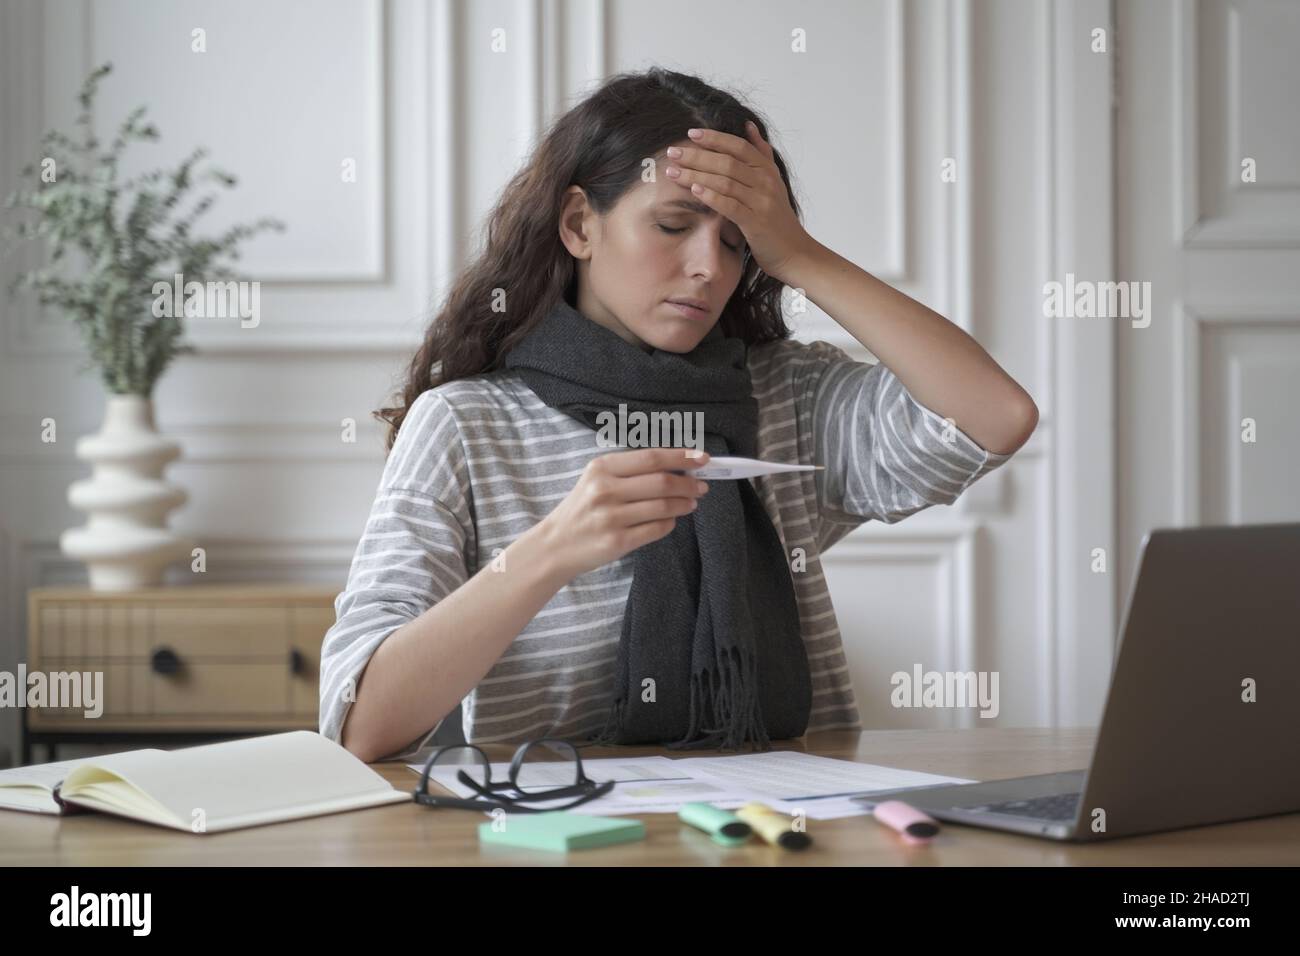 Sick young woman freelancer sitting at workplace and touching forehead while taking body temperature Stock Photo